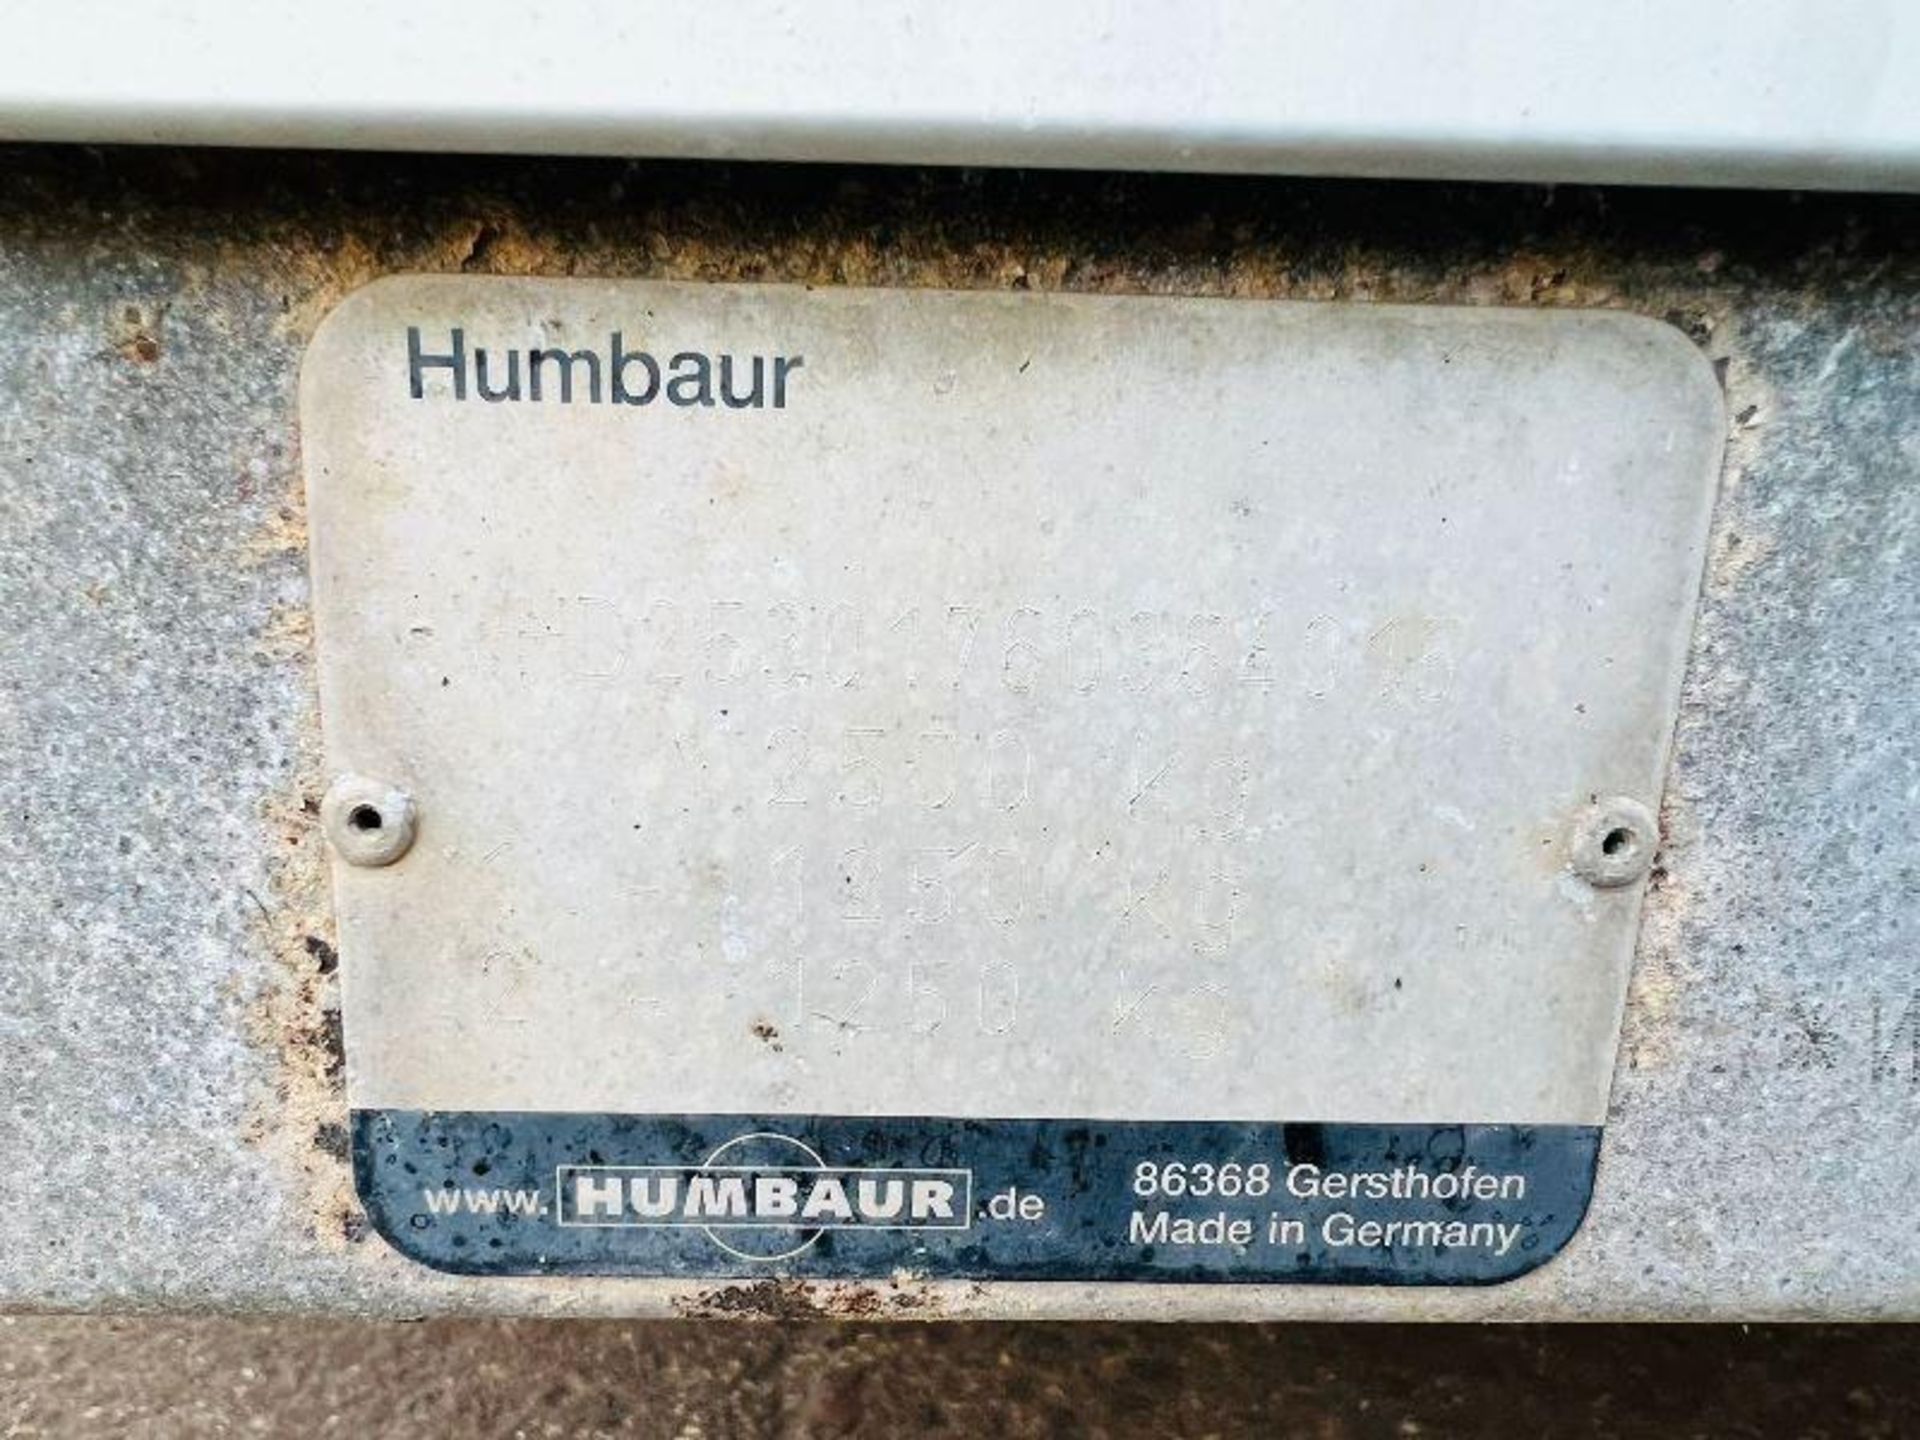 HUMBAUR TOWABLE TWIN AXLE REFRIGERATION UNIT C/W 4 X SUPPORT LEGS - Image 12 of 19